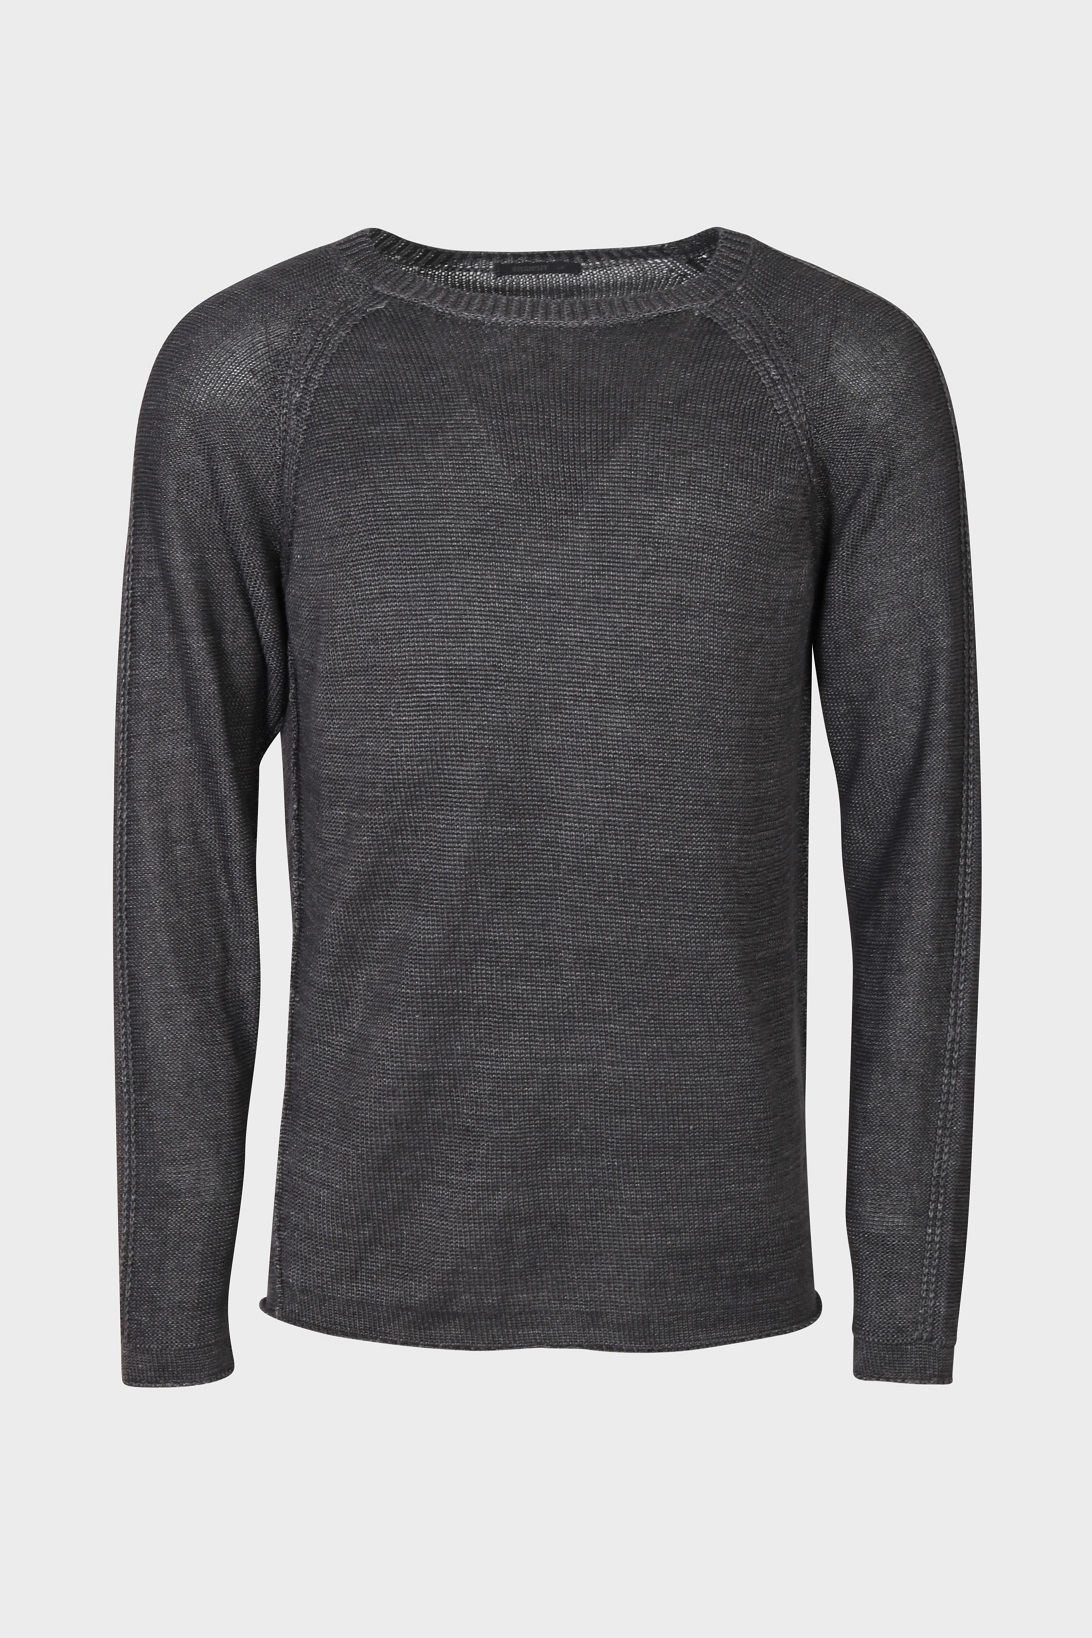 TRANSIT UOMO Linen Knit Pullover in Charcoal